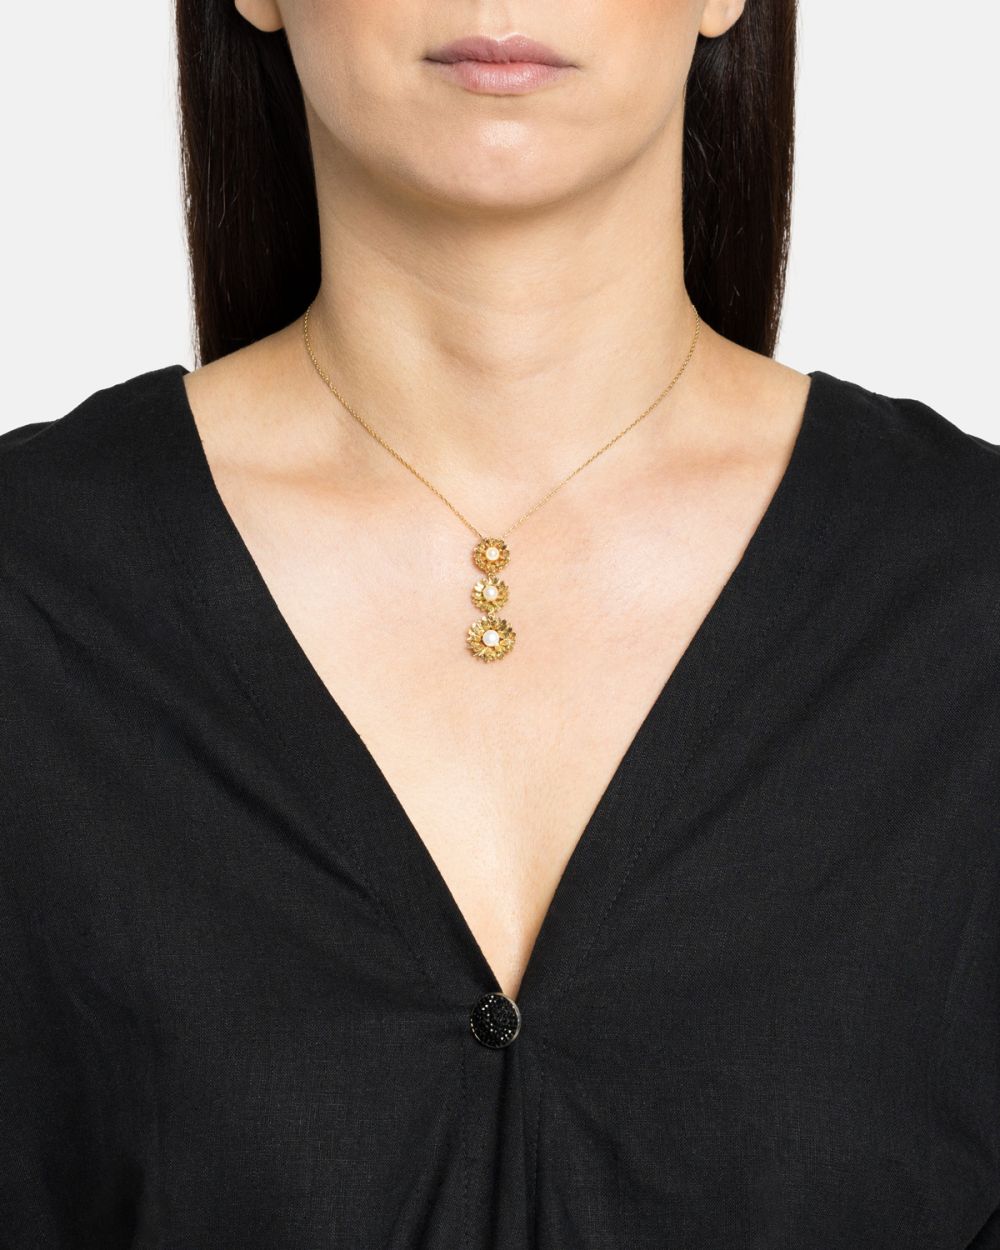 Alma III Necklace in Gold Plated Silver with Pearls